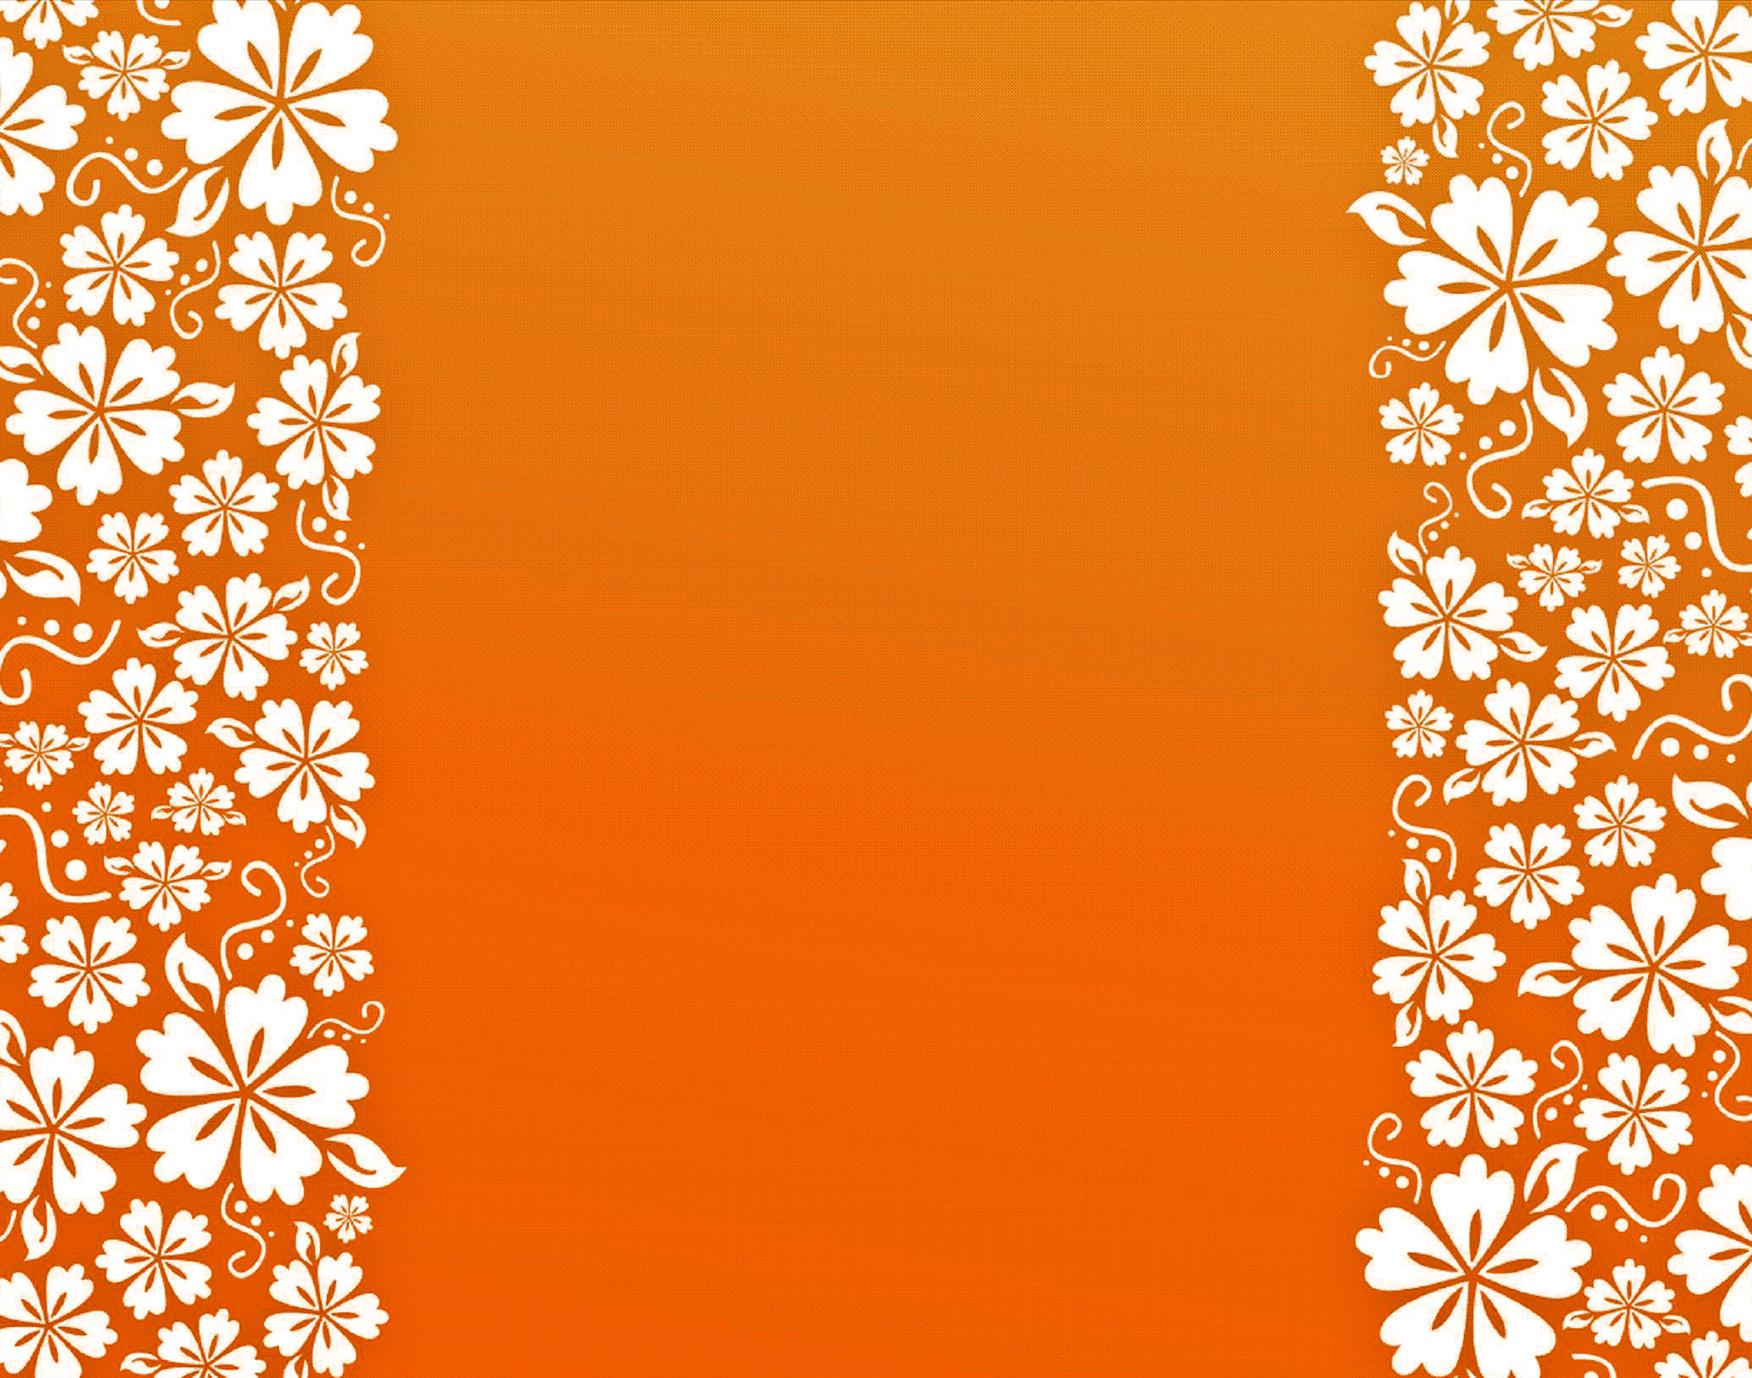 Border And Orange Background In The Design For Ppt Templates